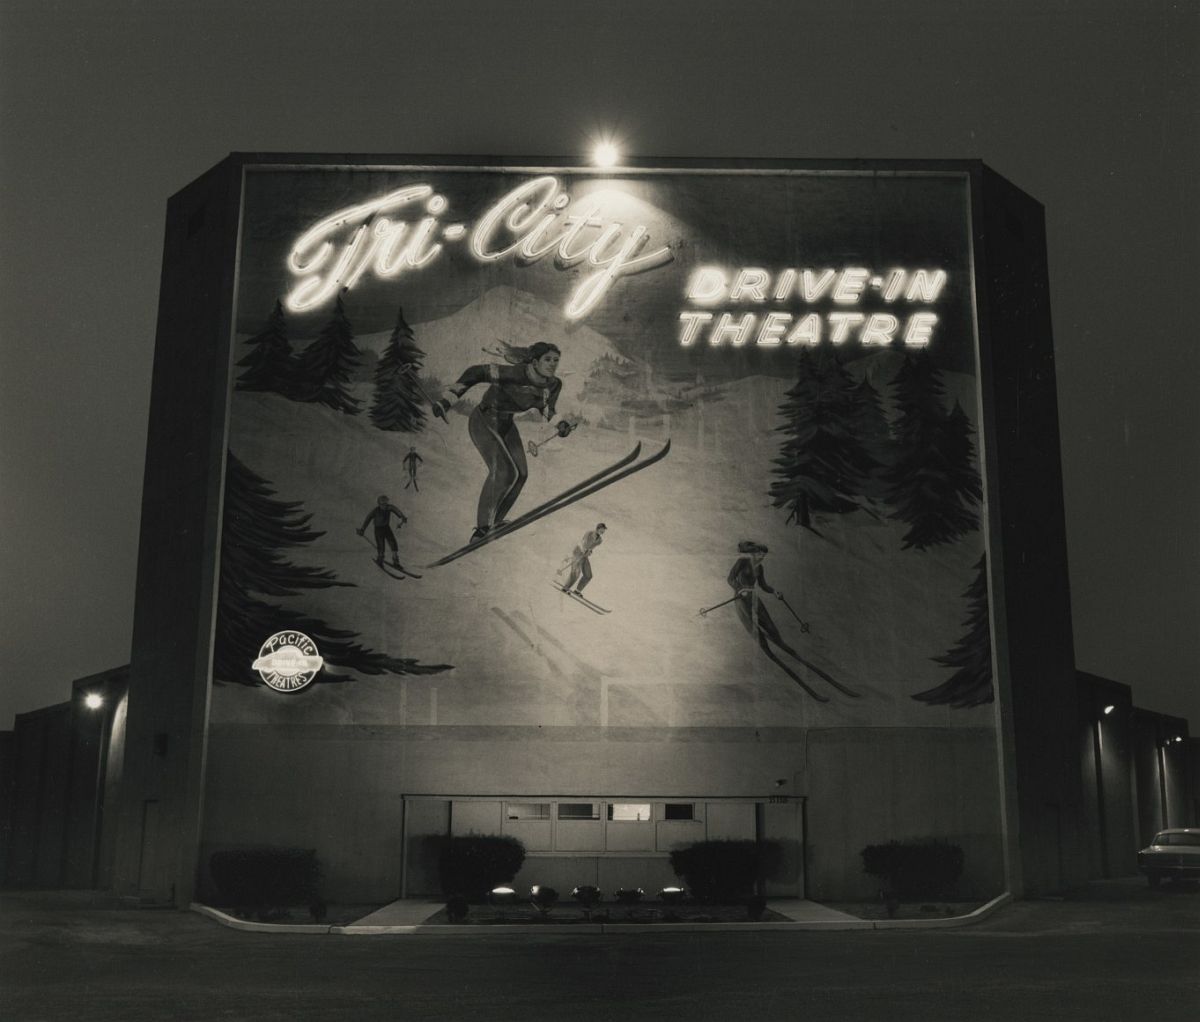 Drive-in Theater, Highway 1-10, Loma Linda, CA1974